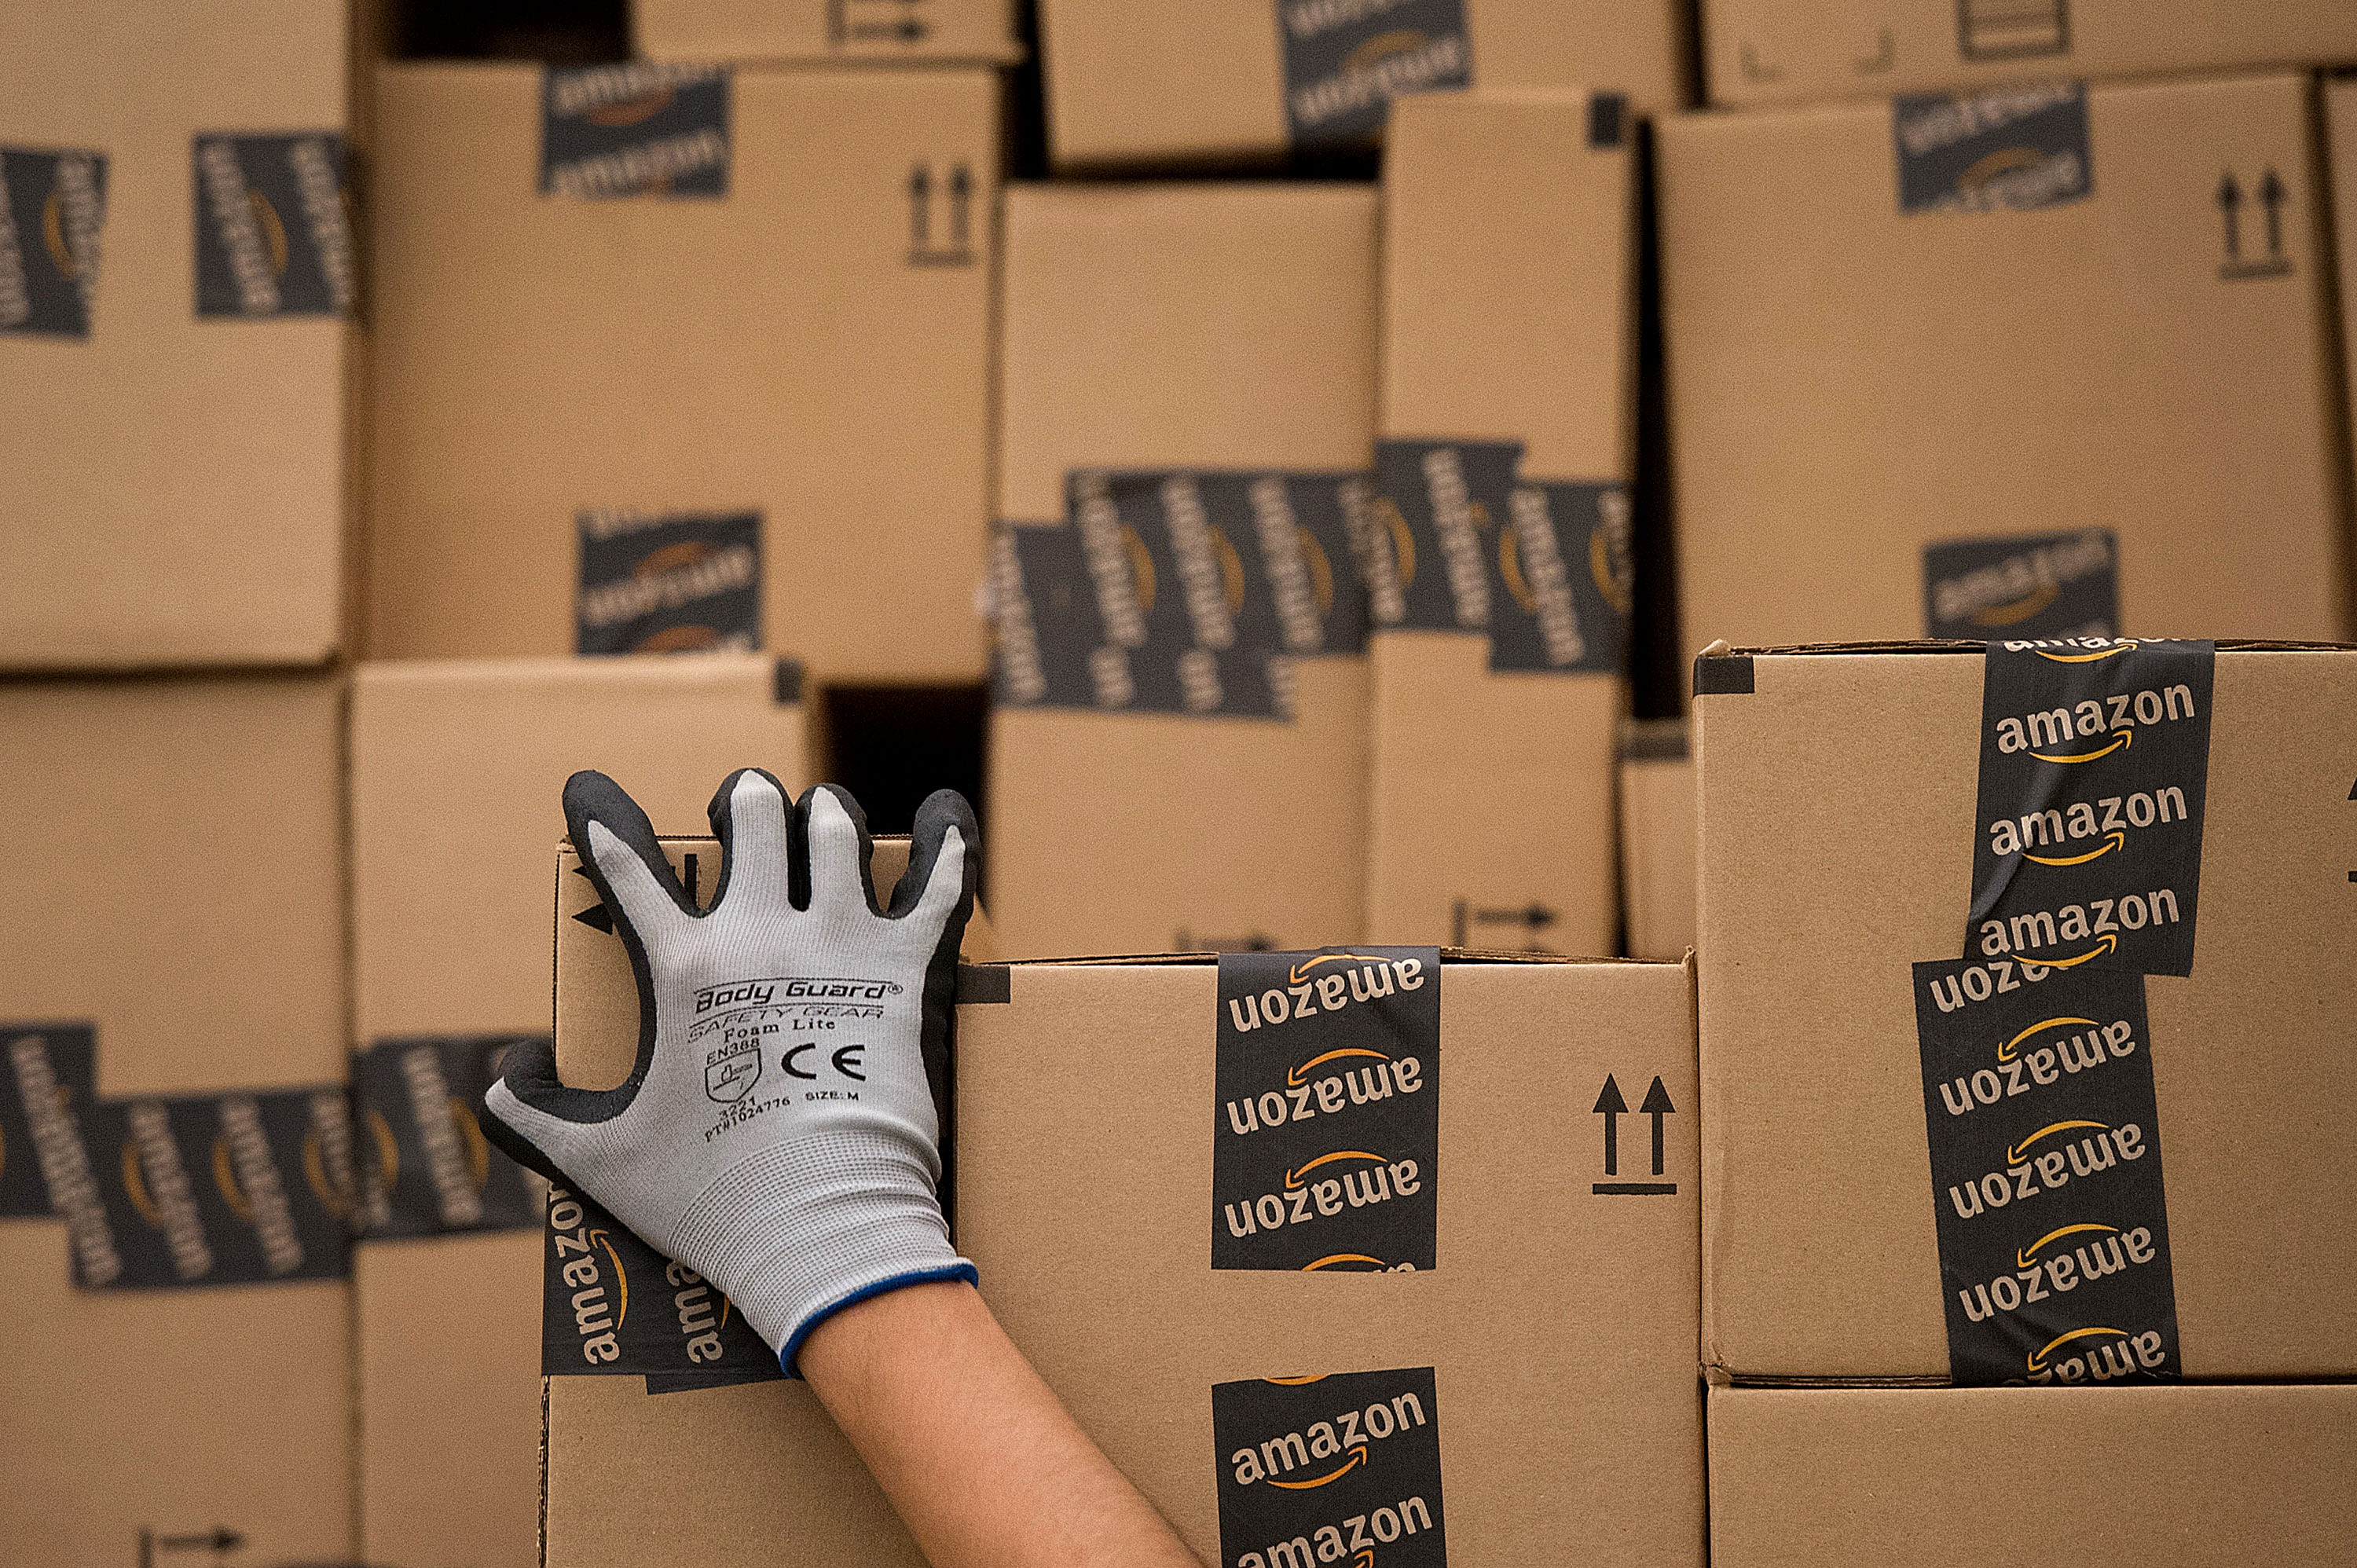 An employee loads a truck with boxes to be shipped at the Amazon.com Inc. distribution center in Phoenix, Arizona, U.S. on Monday, Nov. 26, 2012. (David Paul Morris—Bloomberg/Getty Images)